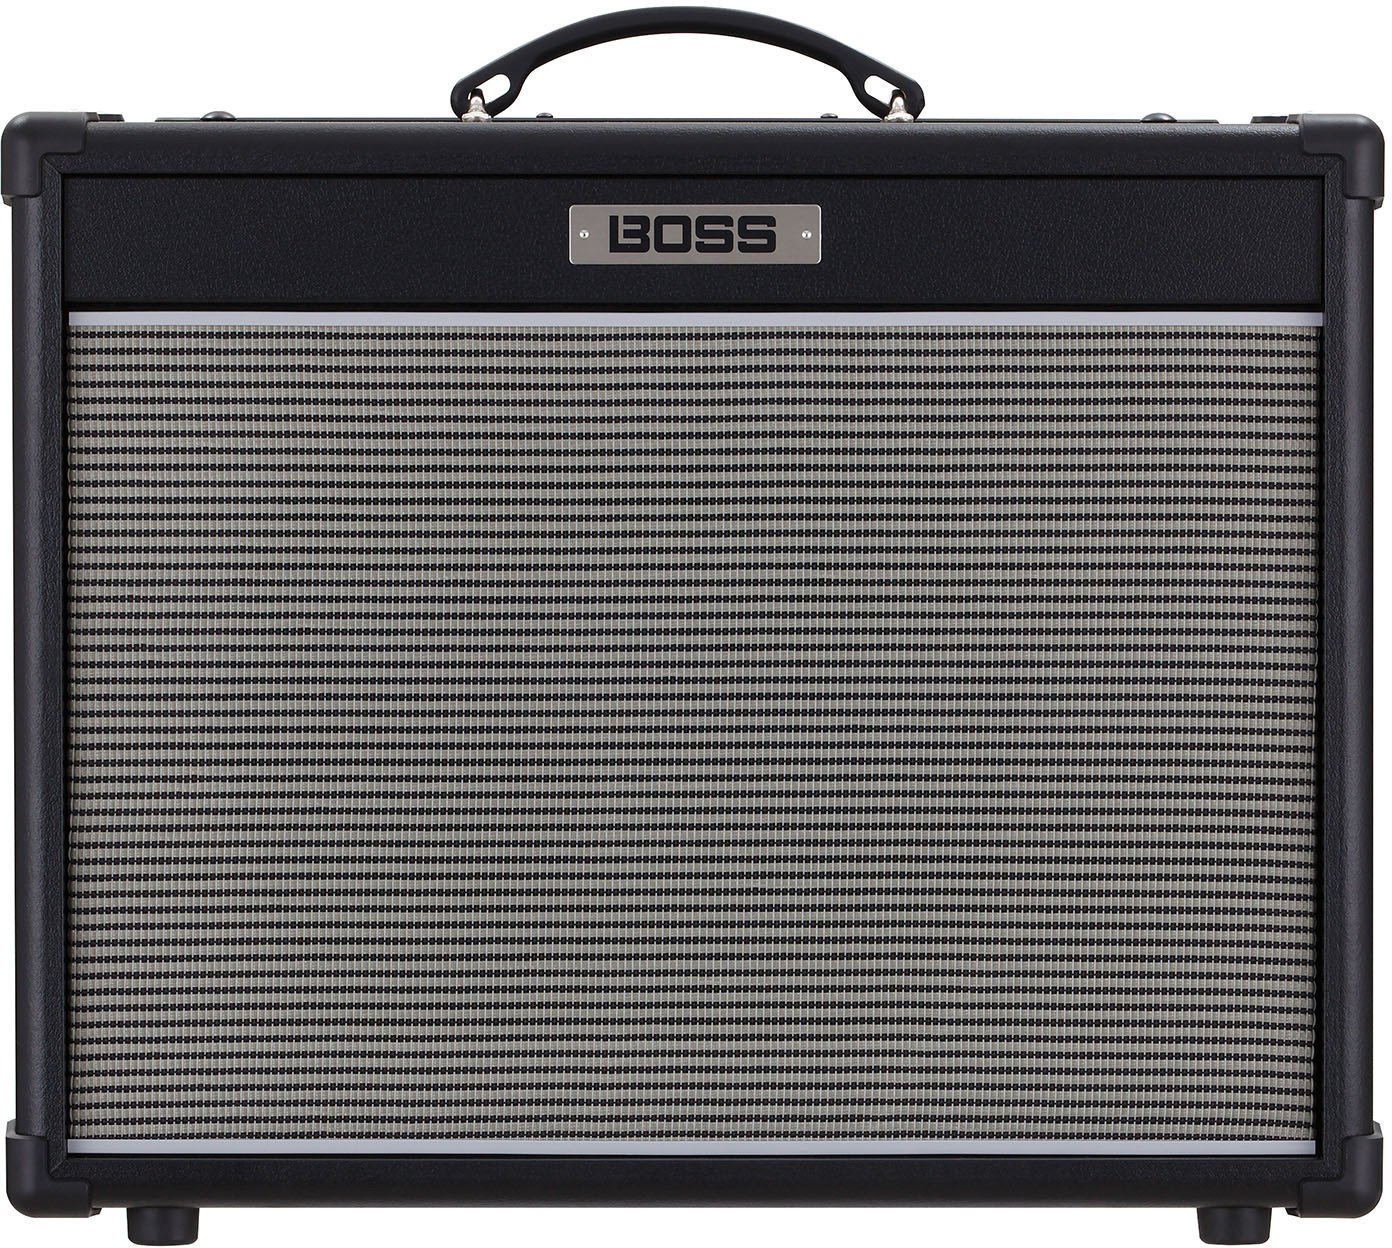 Solid-State Combo Boss Nextone Stage